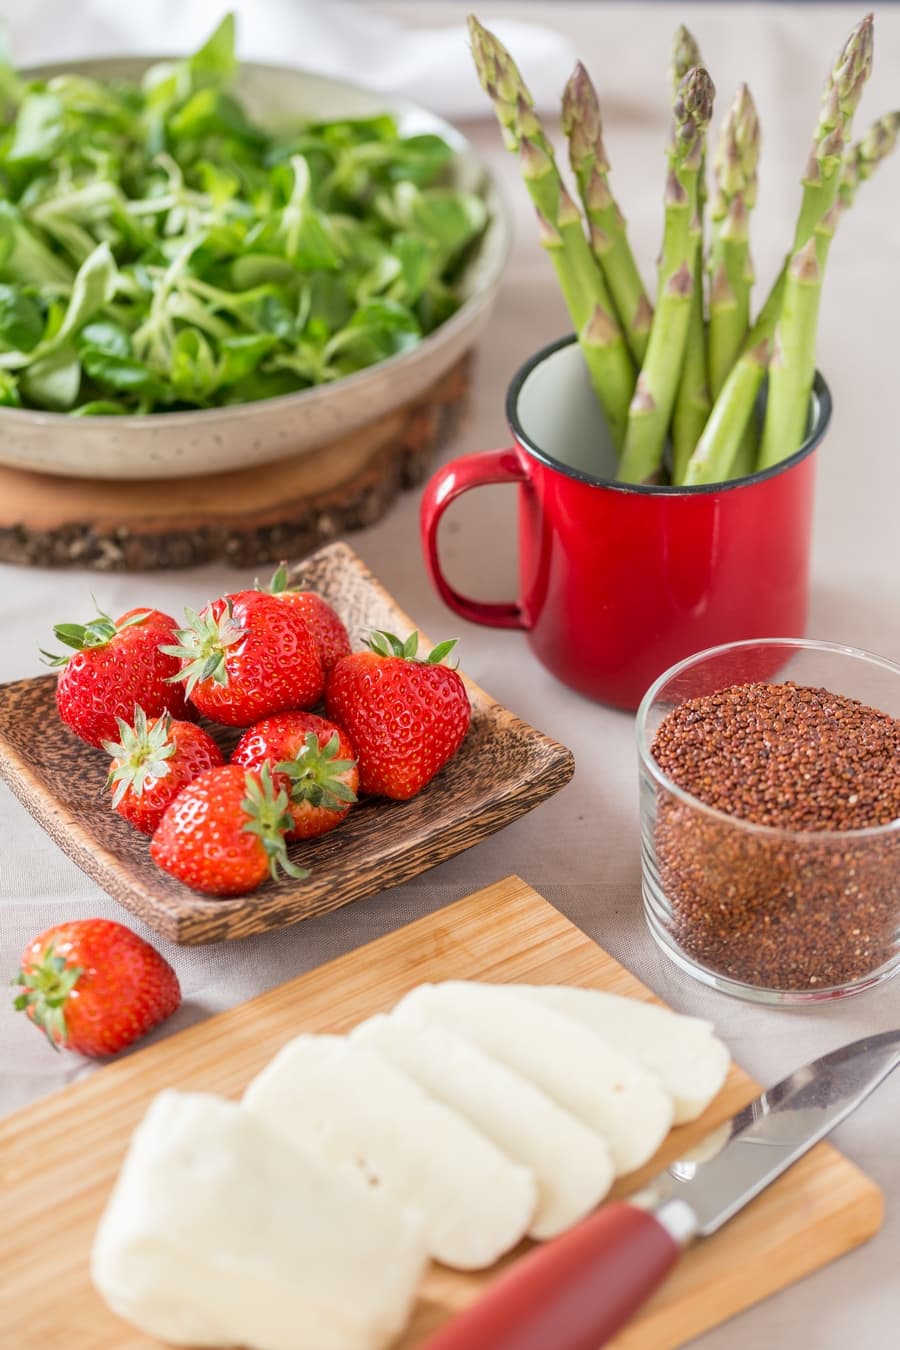 Red quinoa, halloumi, strawberries, asparagus and green salad leaves.